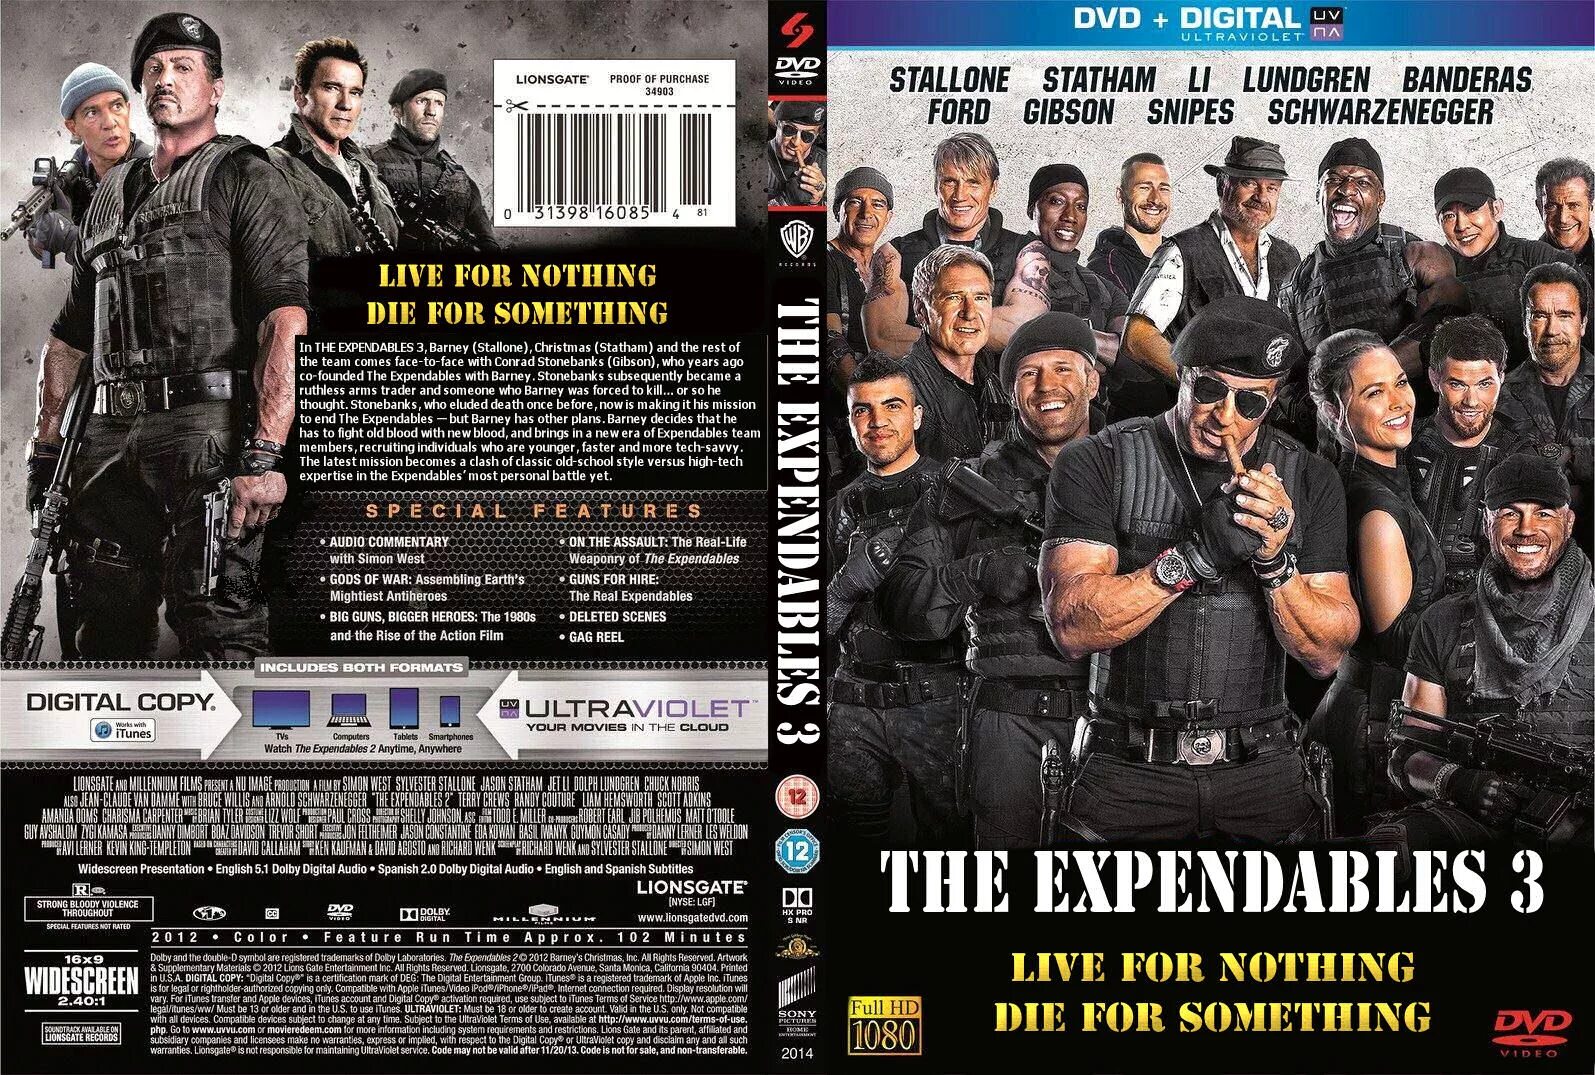 The Expendables 3 обложка DVD. The Expendables 3 DVD Cover. The Expendables постеры. The Expendables 3 2014.